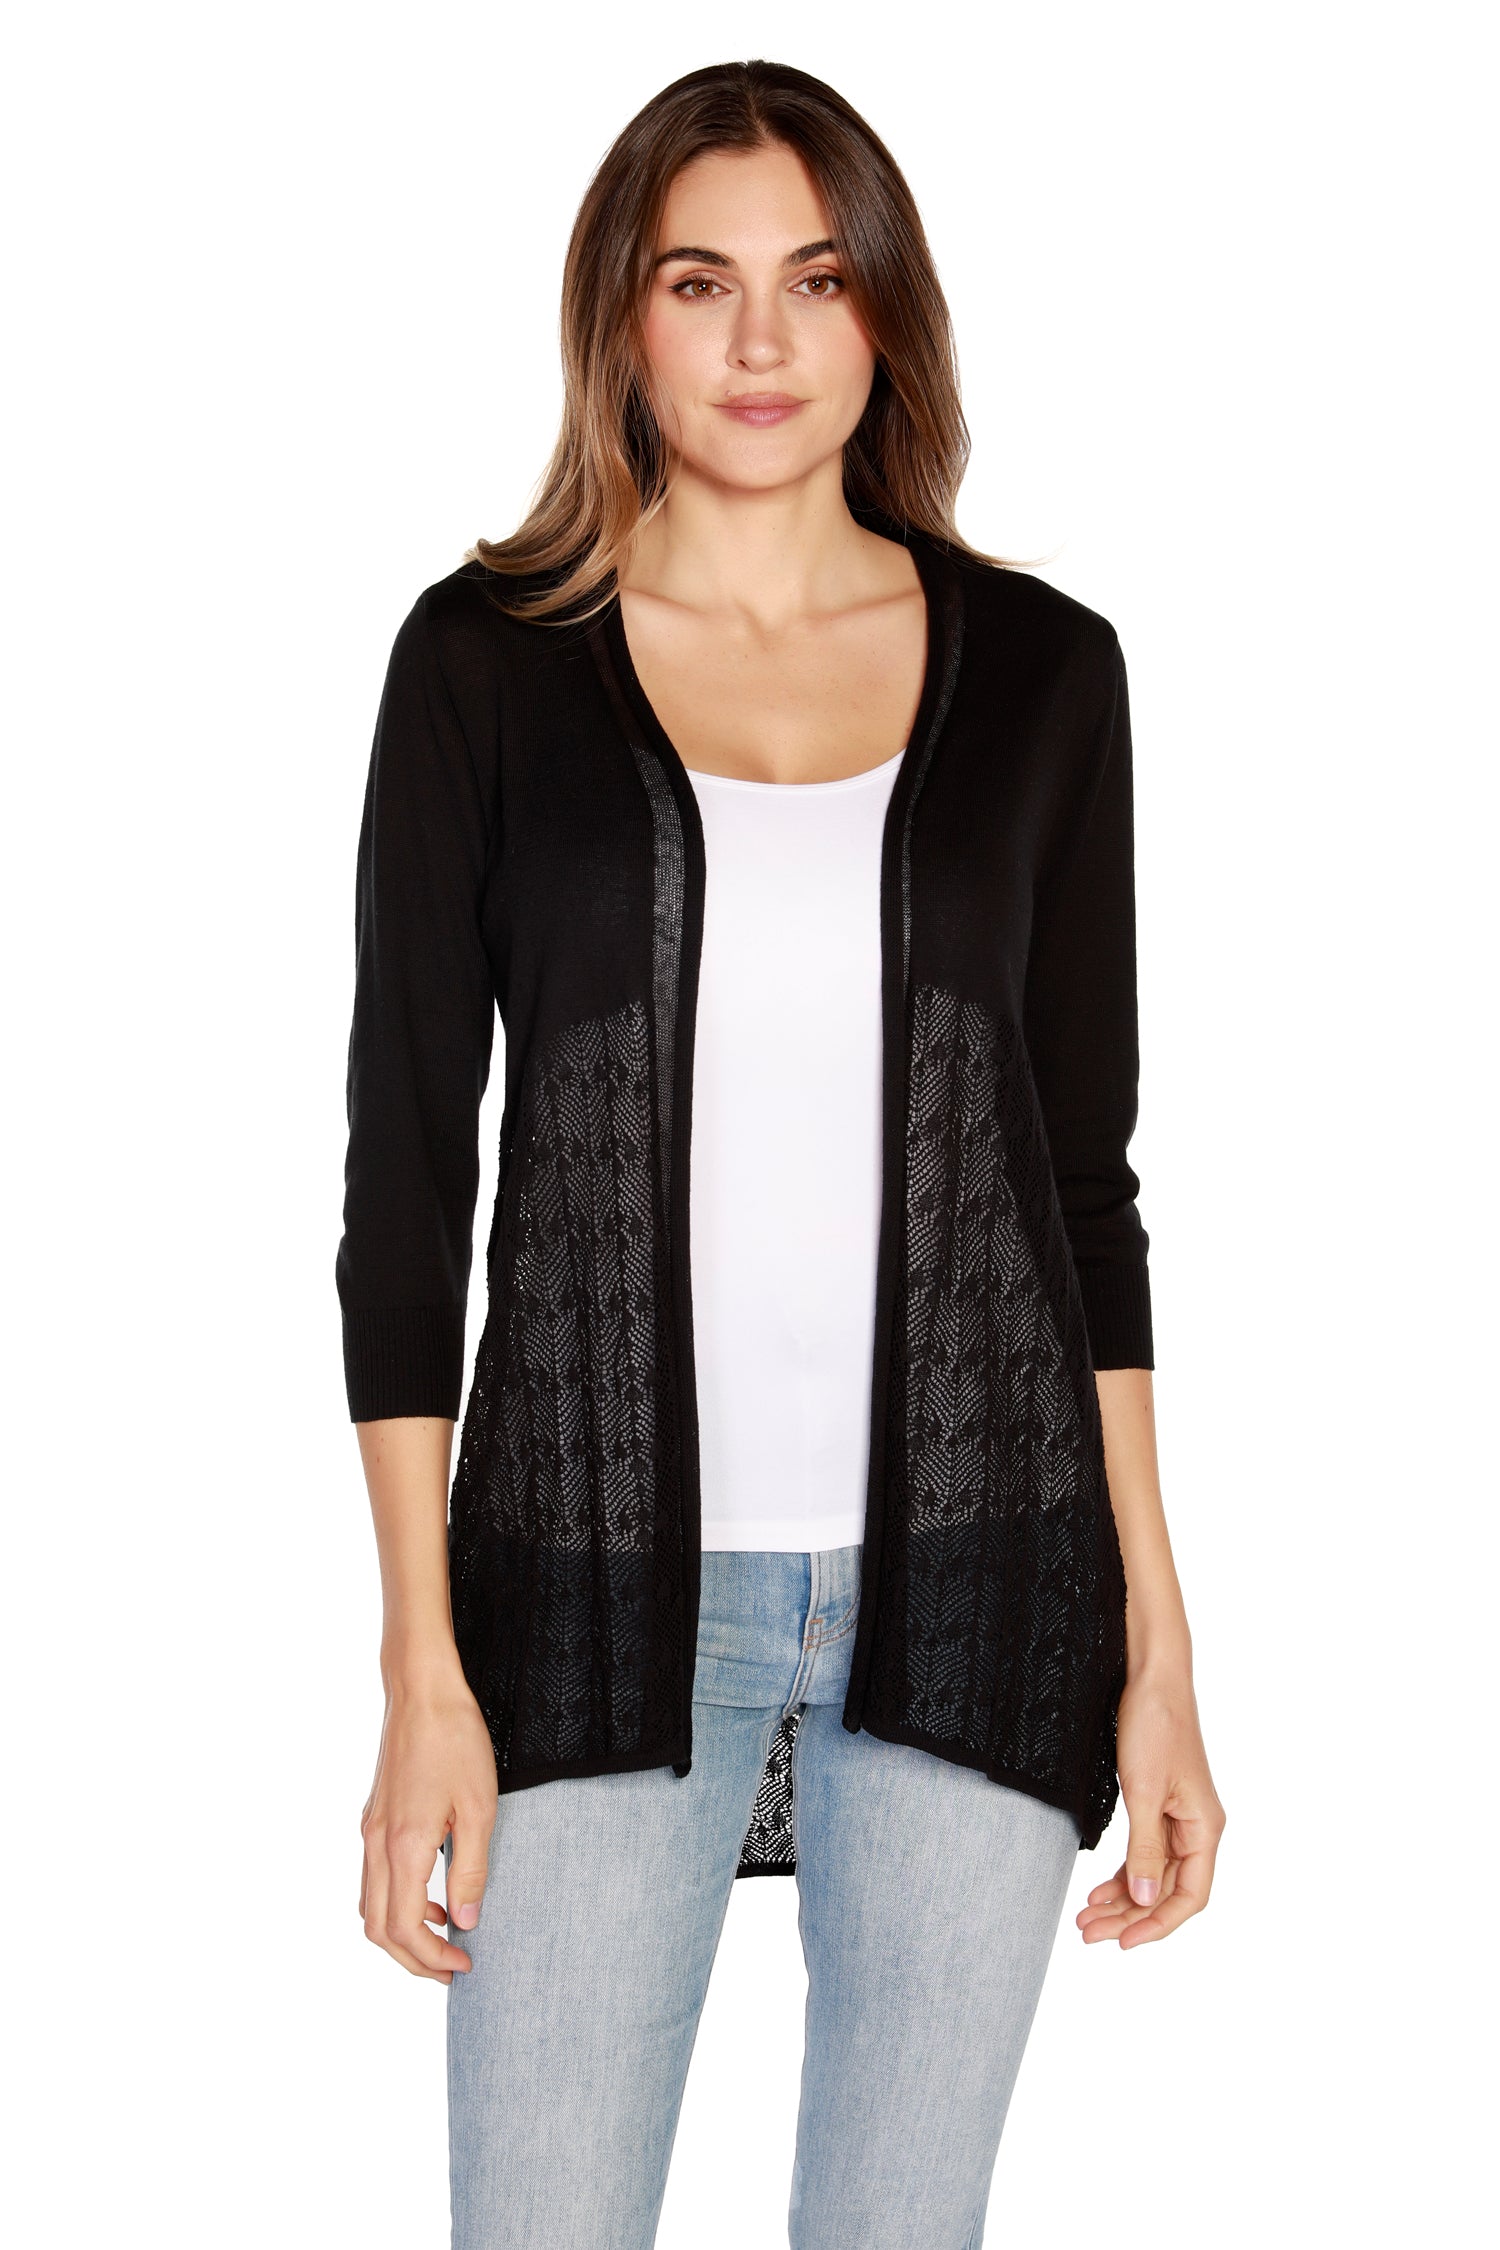 Women’s Open Front Semi-Sheer Lacey Pointelle High-Low Cardigan